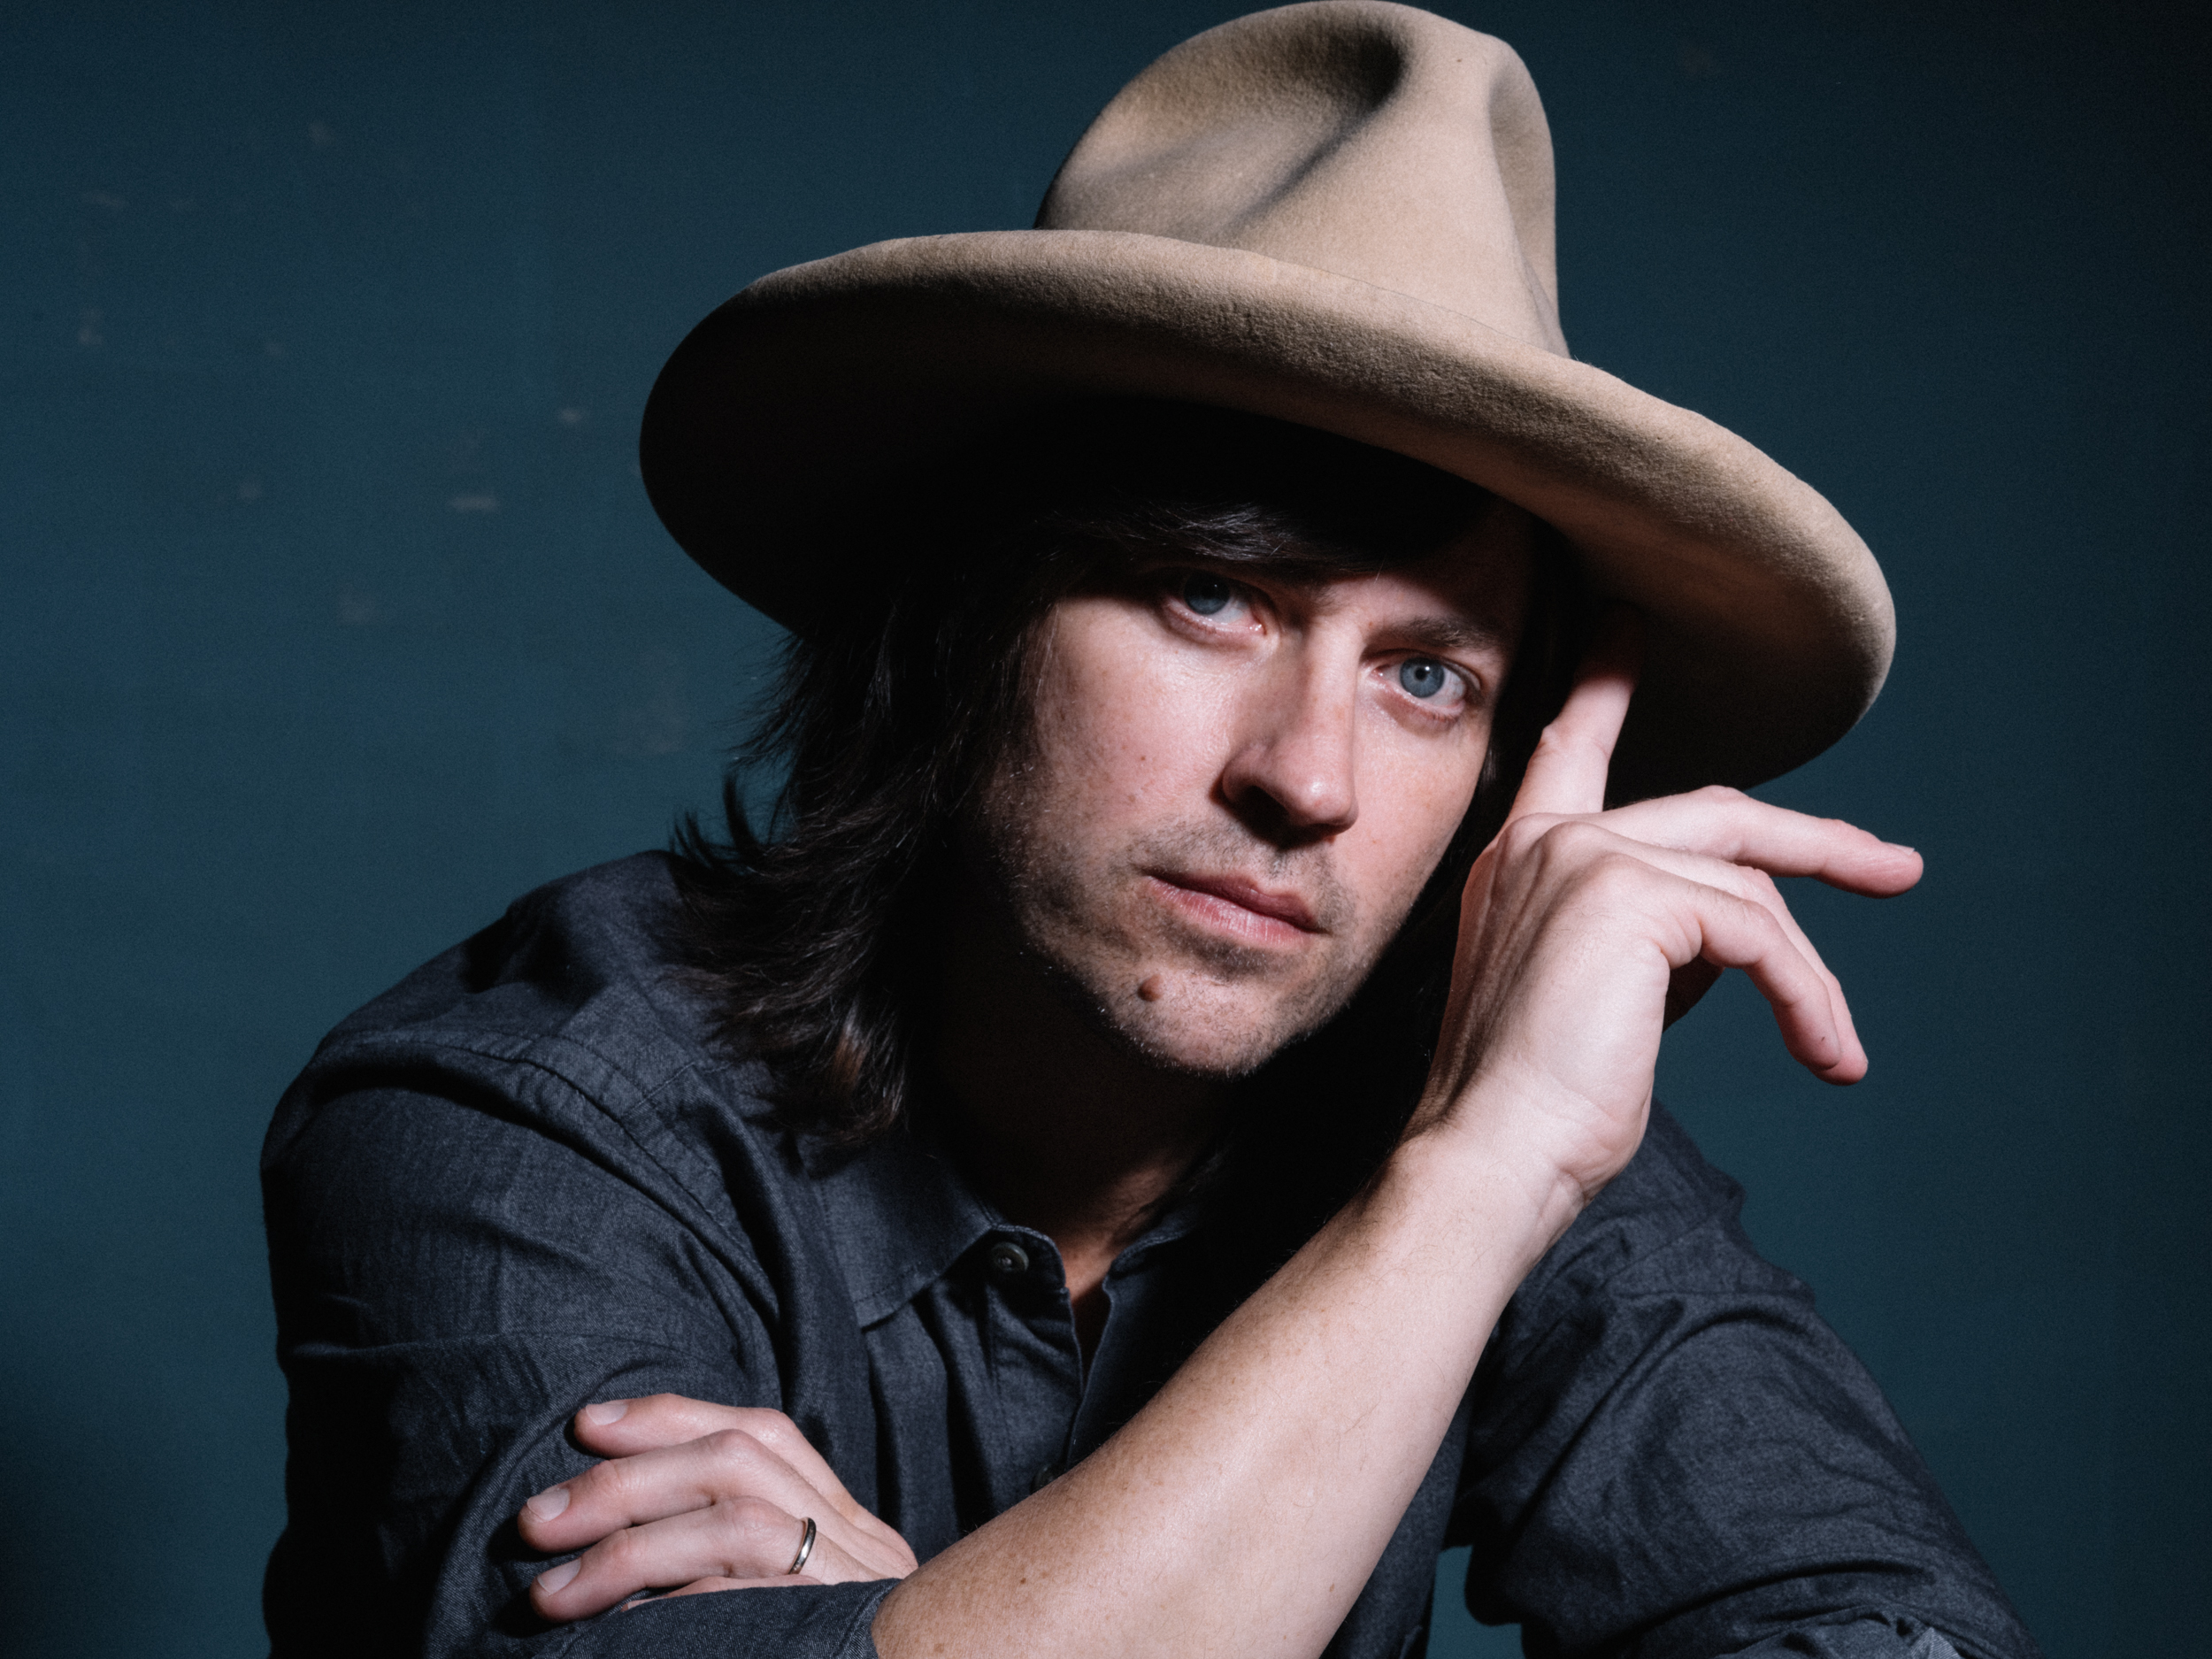 With a fedora on his head, Rhett Miller, in a dark shirt, looks at the camera